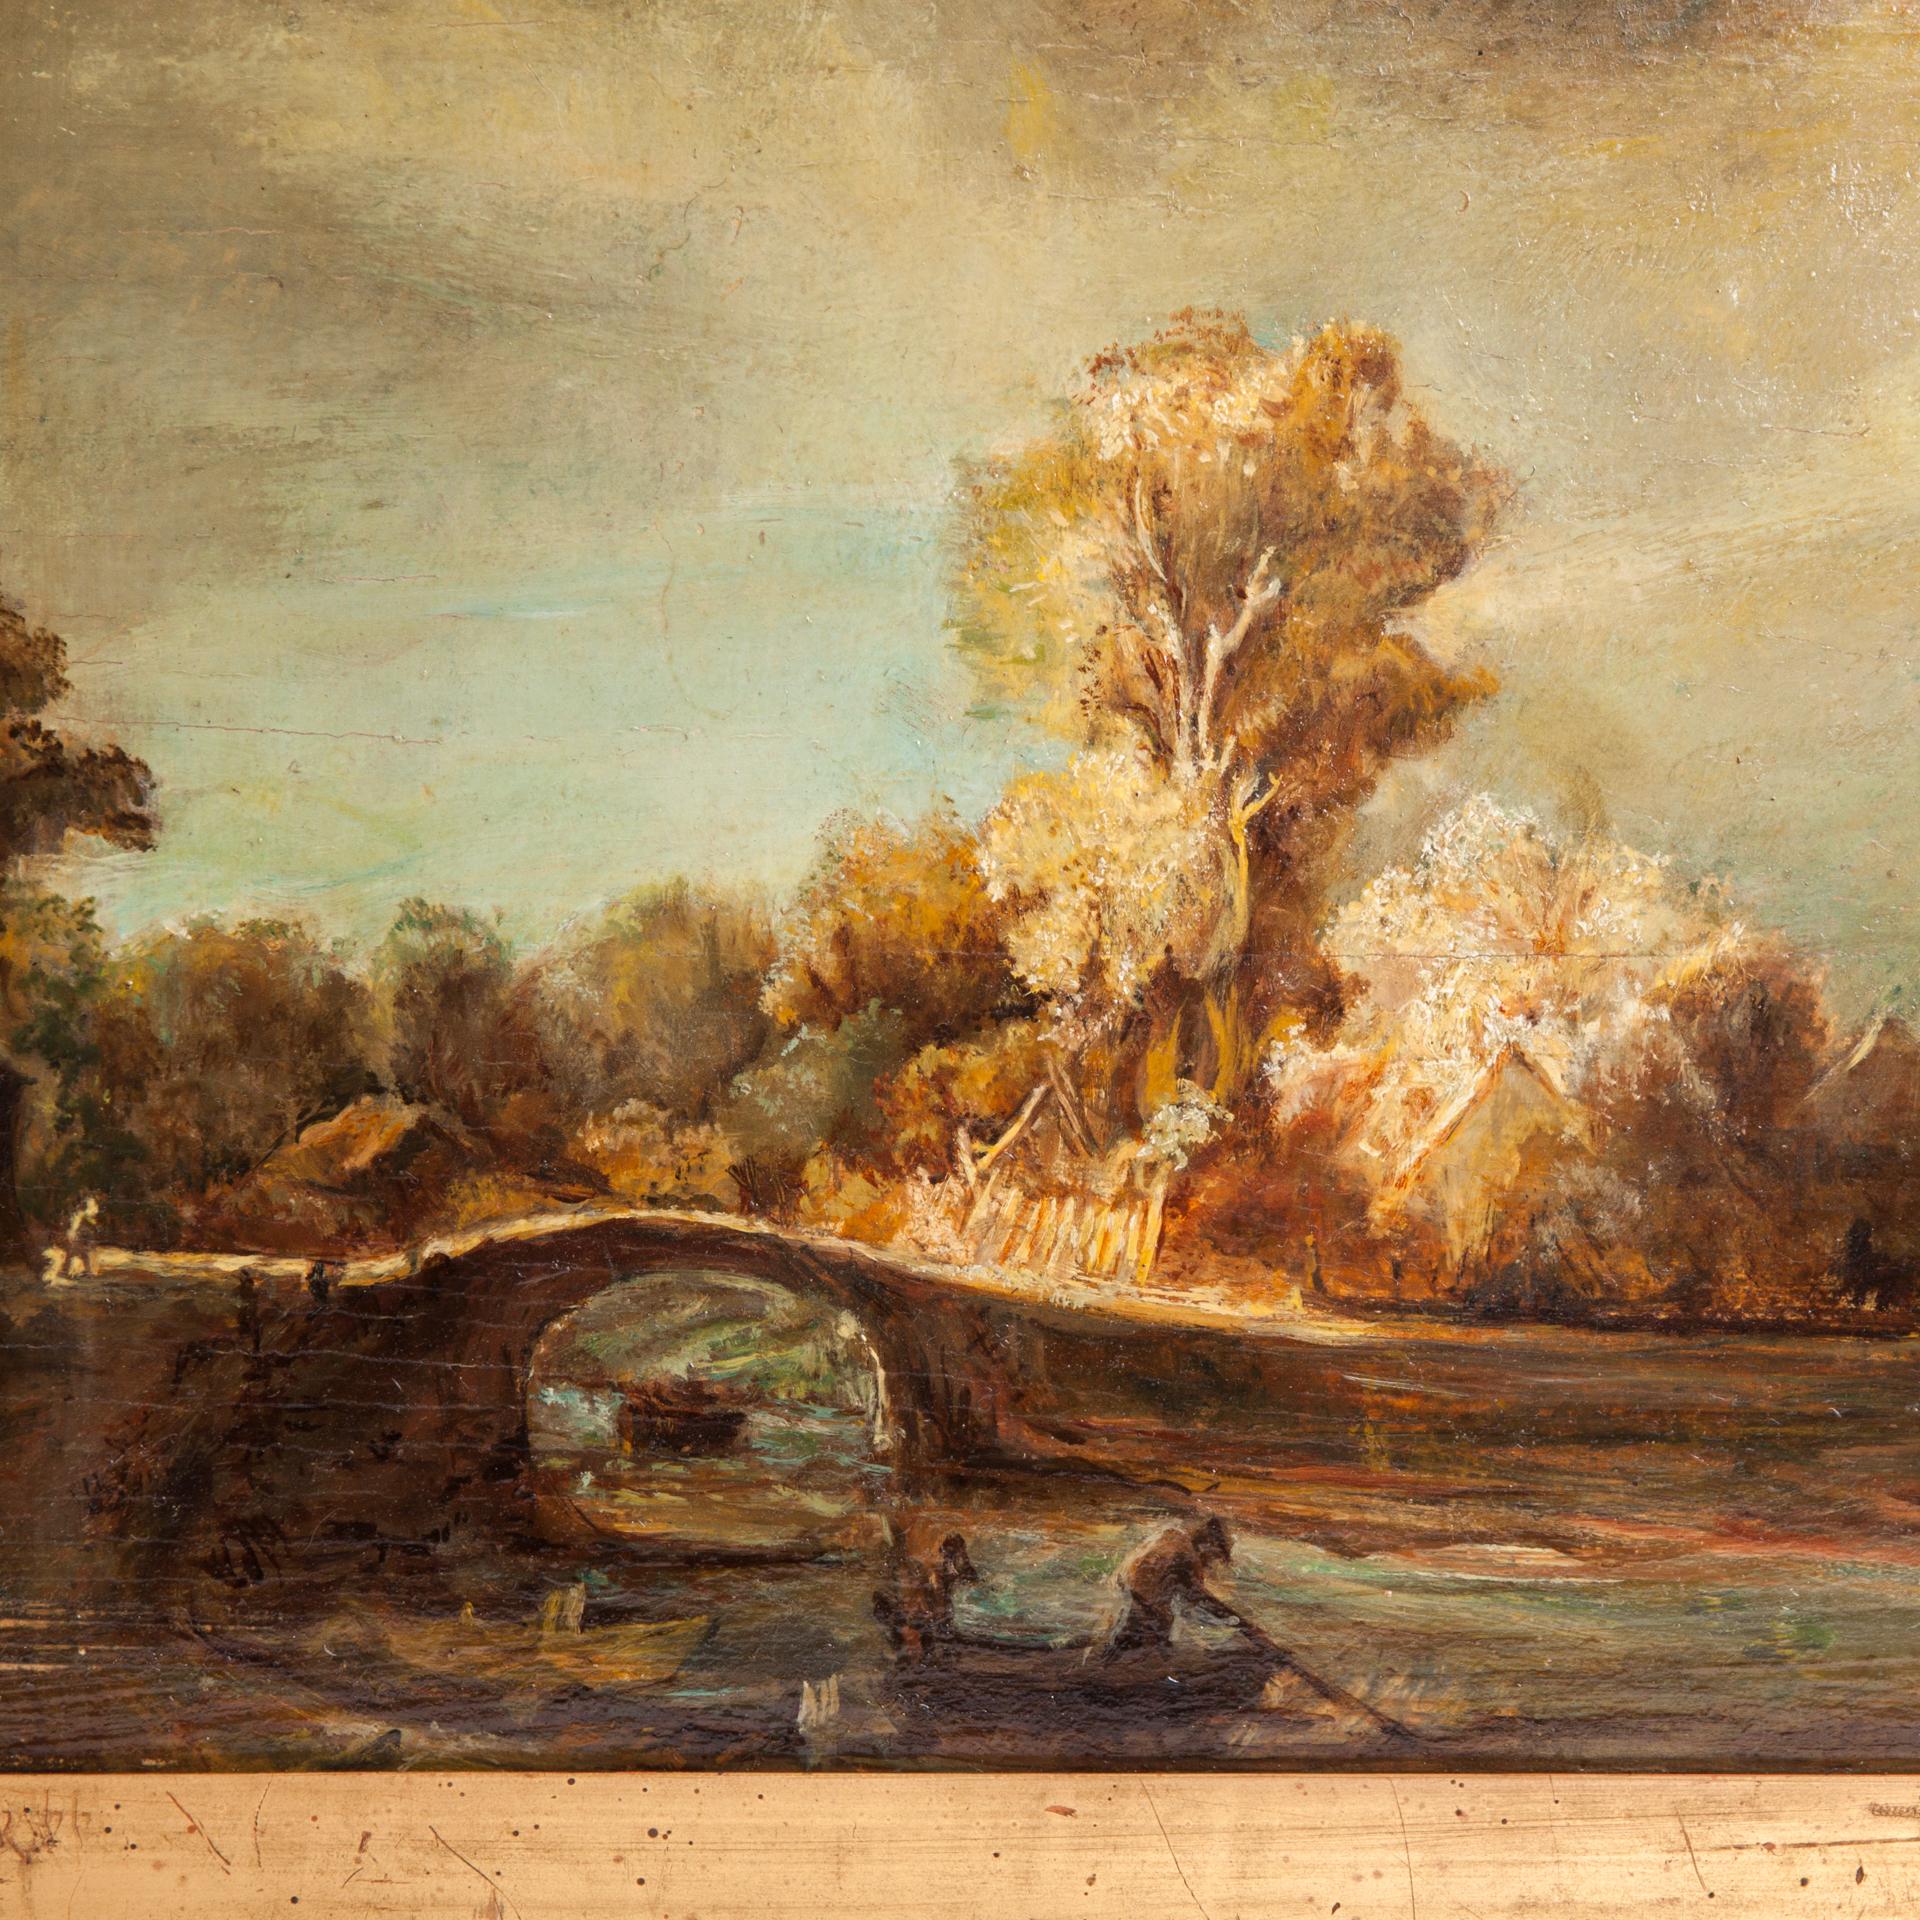 An elaborate an historical (mid-19th Century) copy of a famous painting ‘Landscape with a Stone Bridge’ by Rembrandt van Rijn’sone. One of the most recognisable landscapes of 17th century art.

 The artwork is painted with oil paint on a wooden